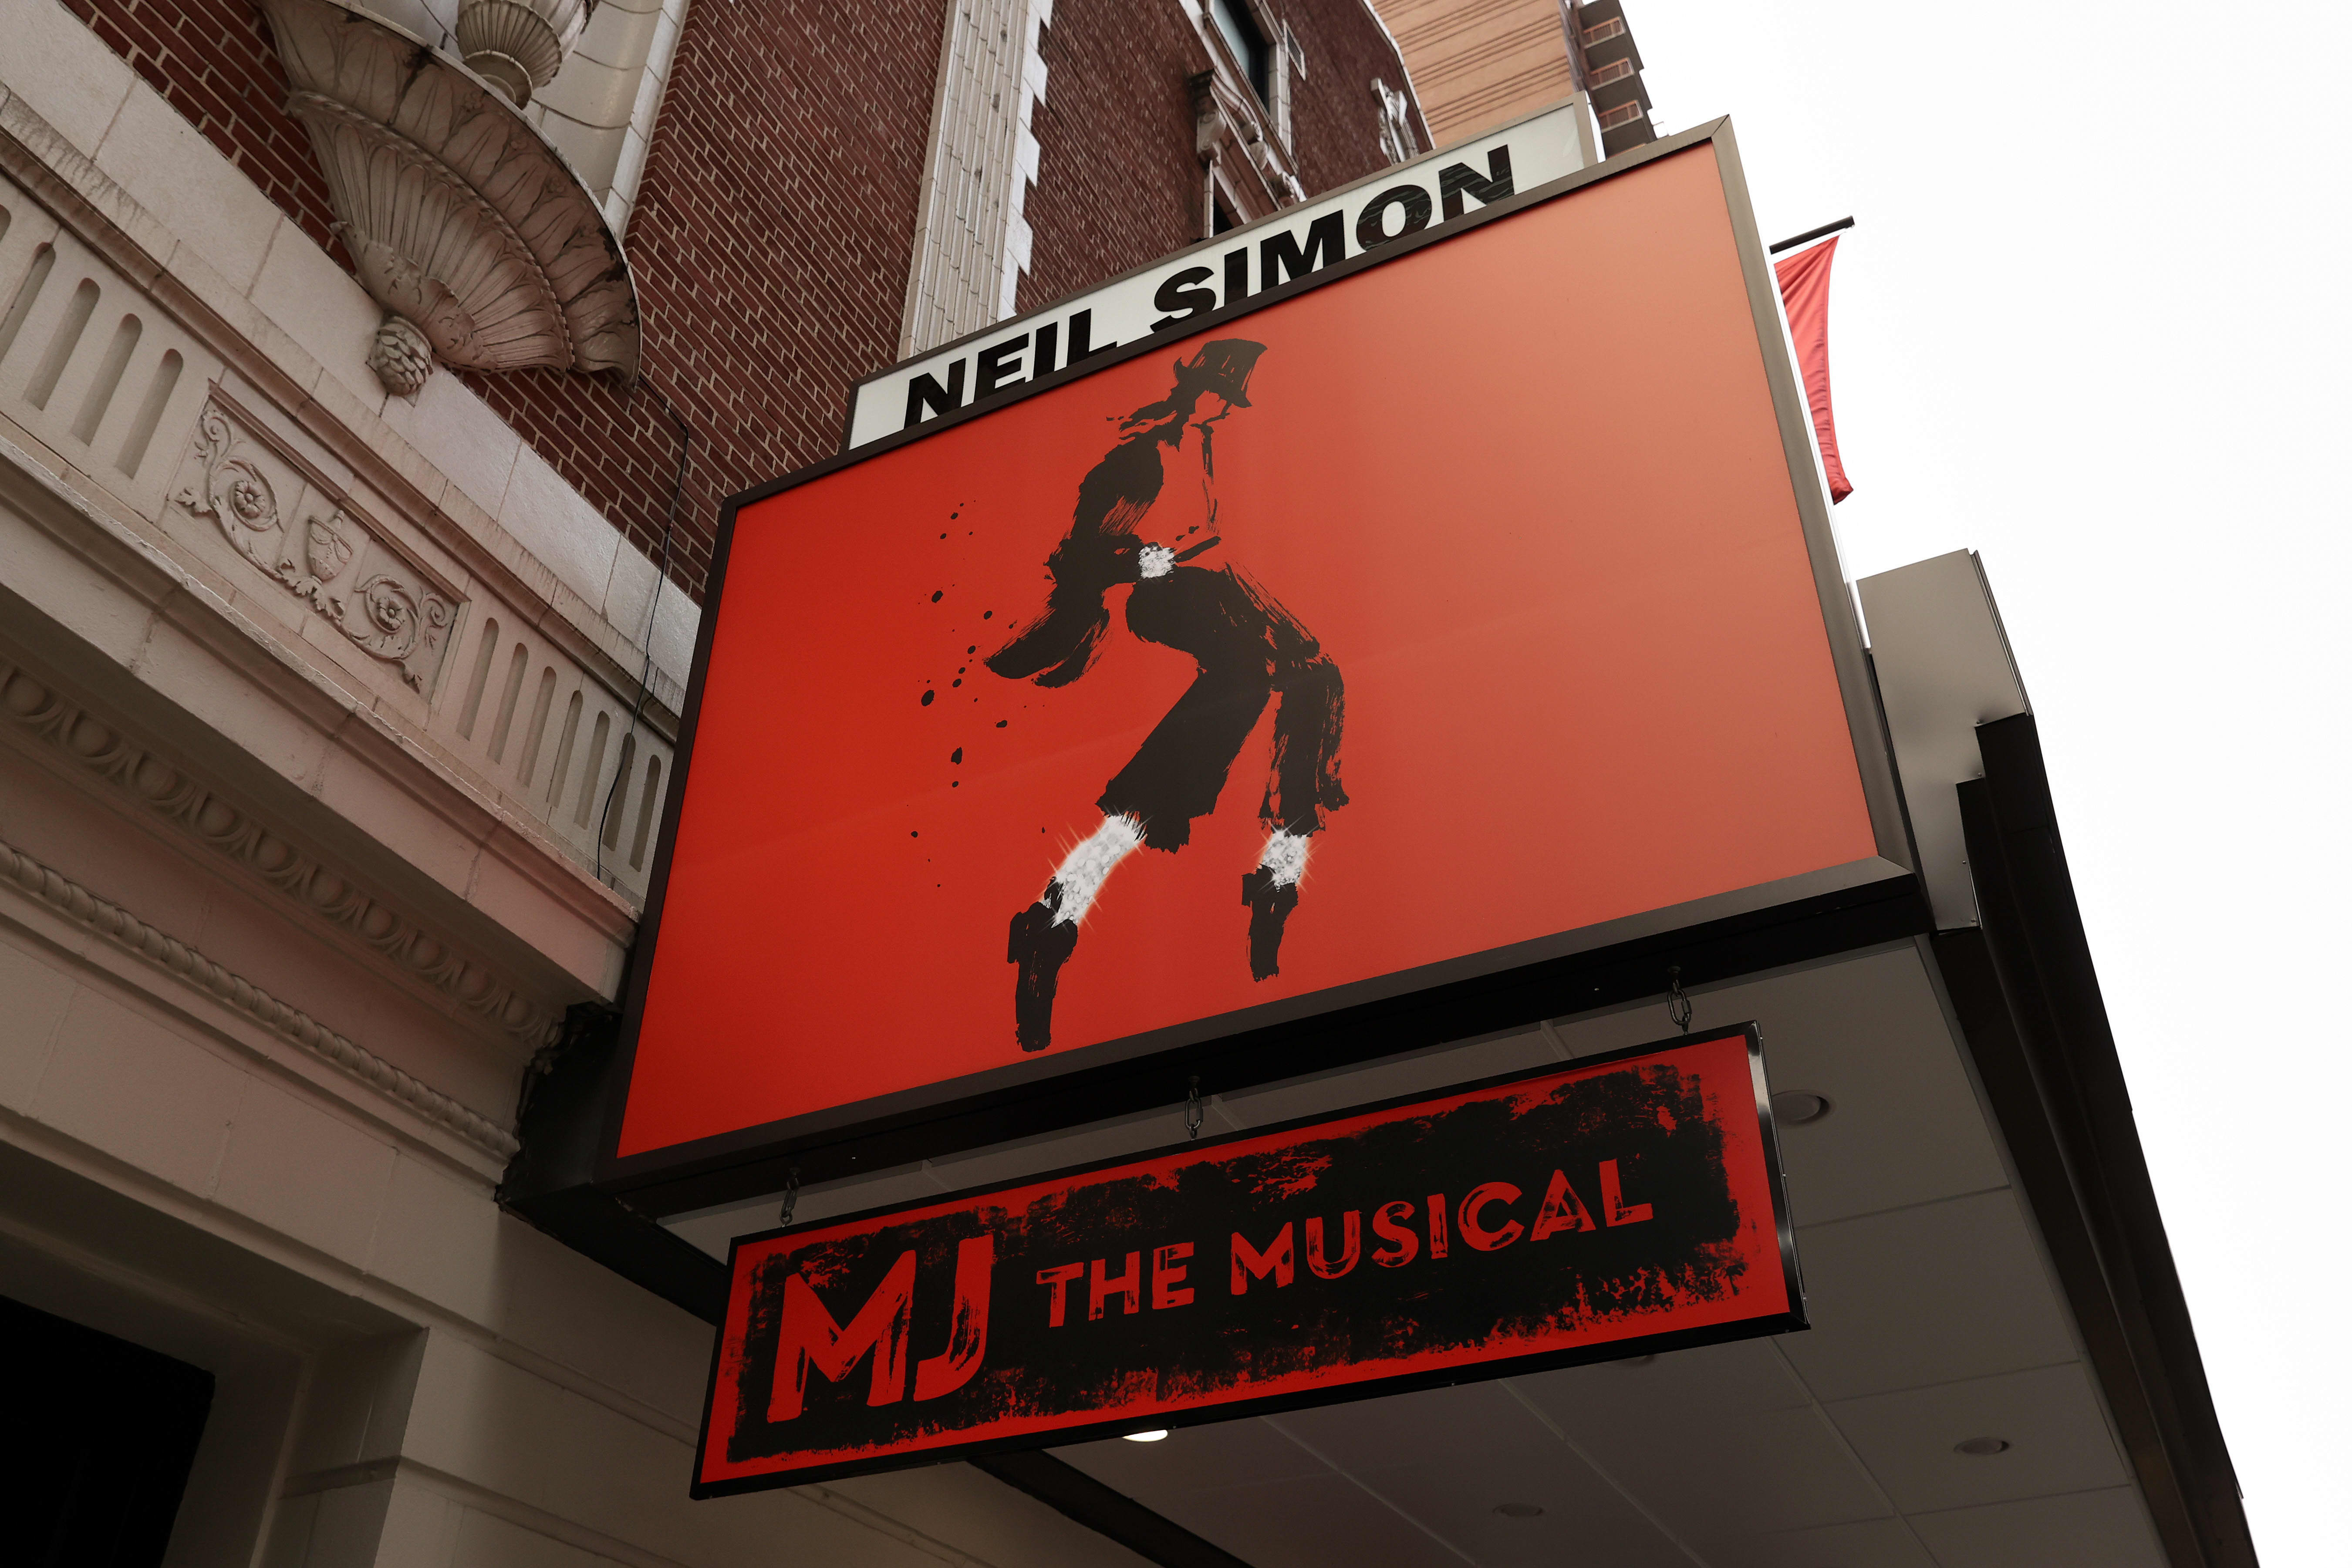 A Michael Jackson musical is coming to Broadway